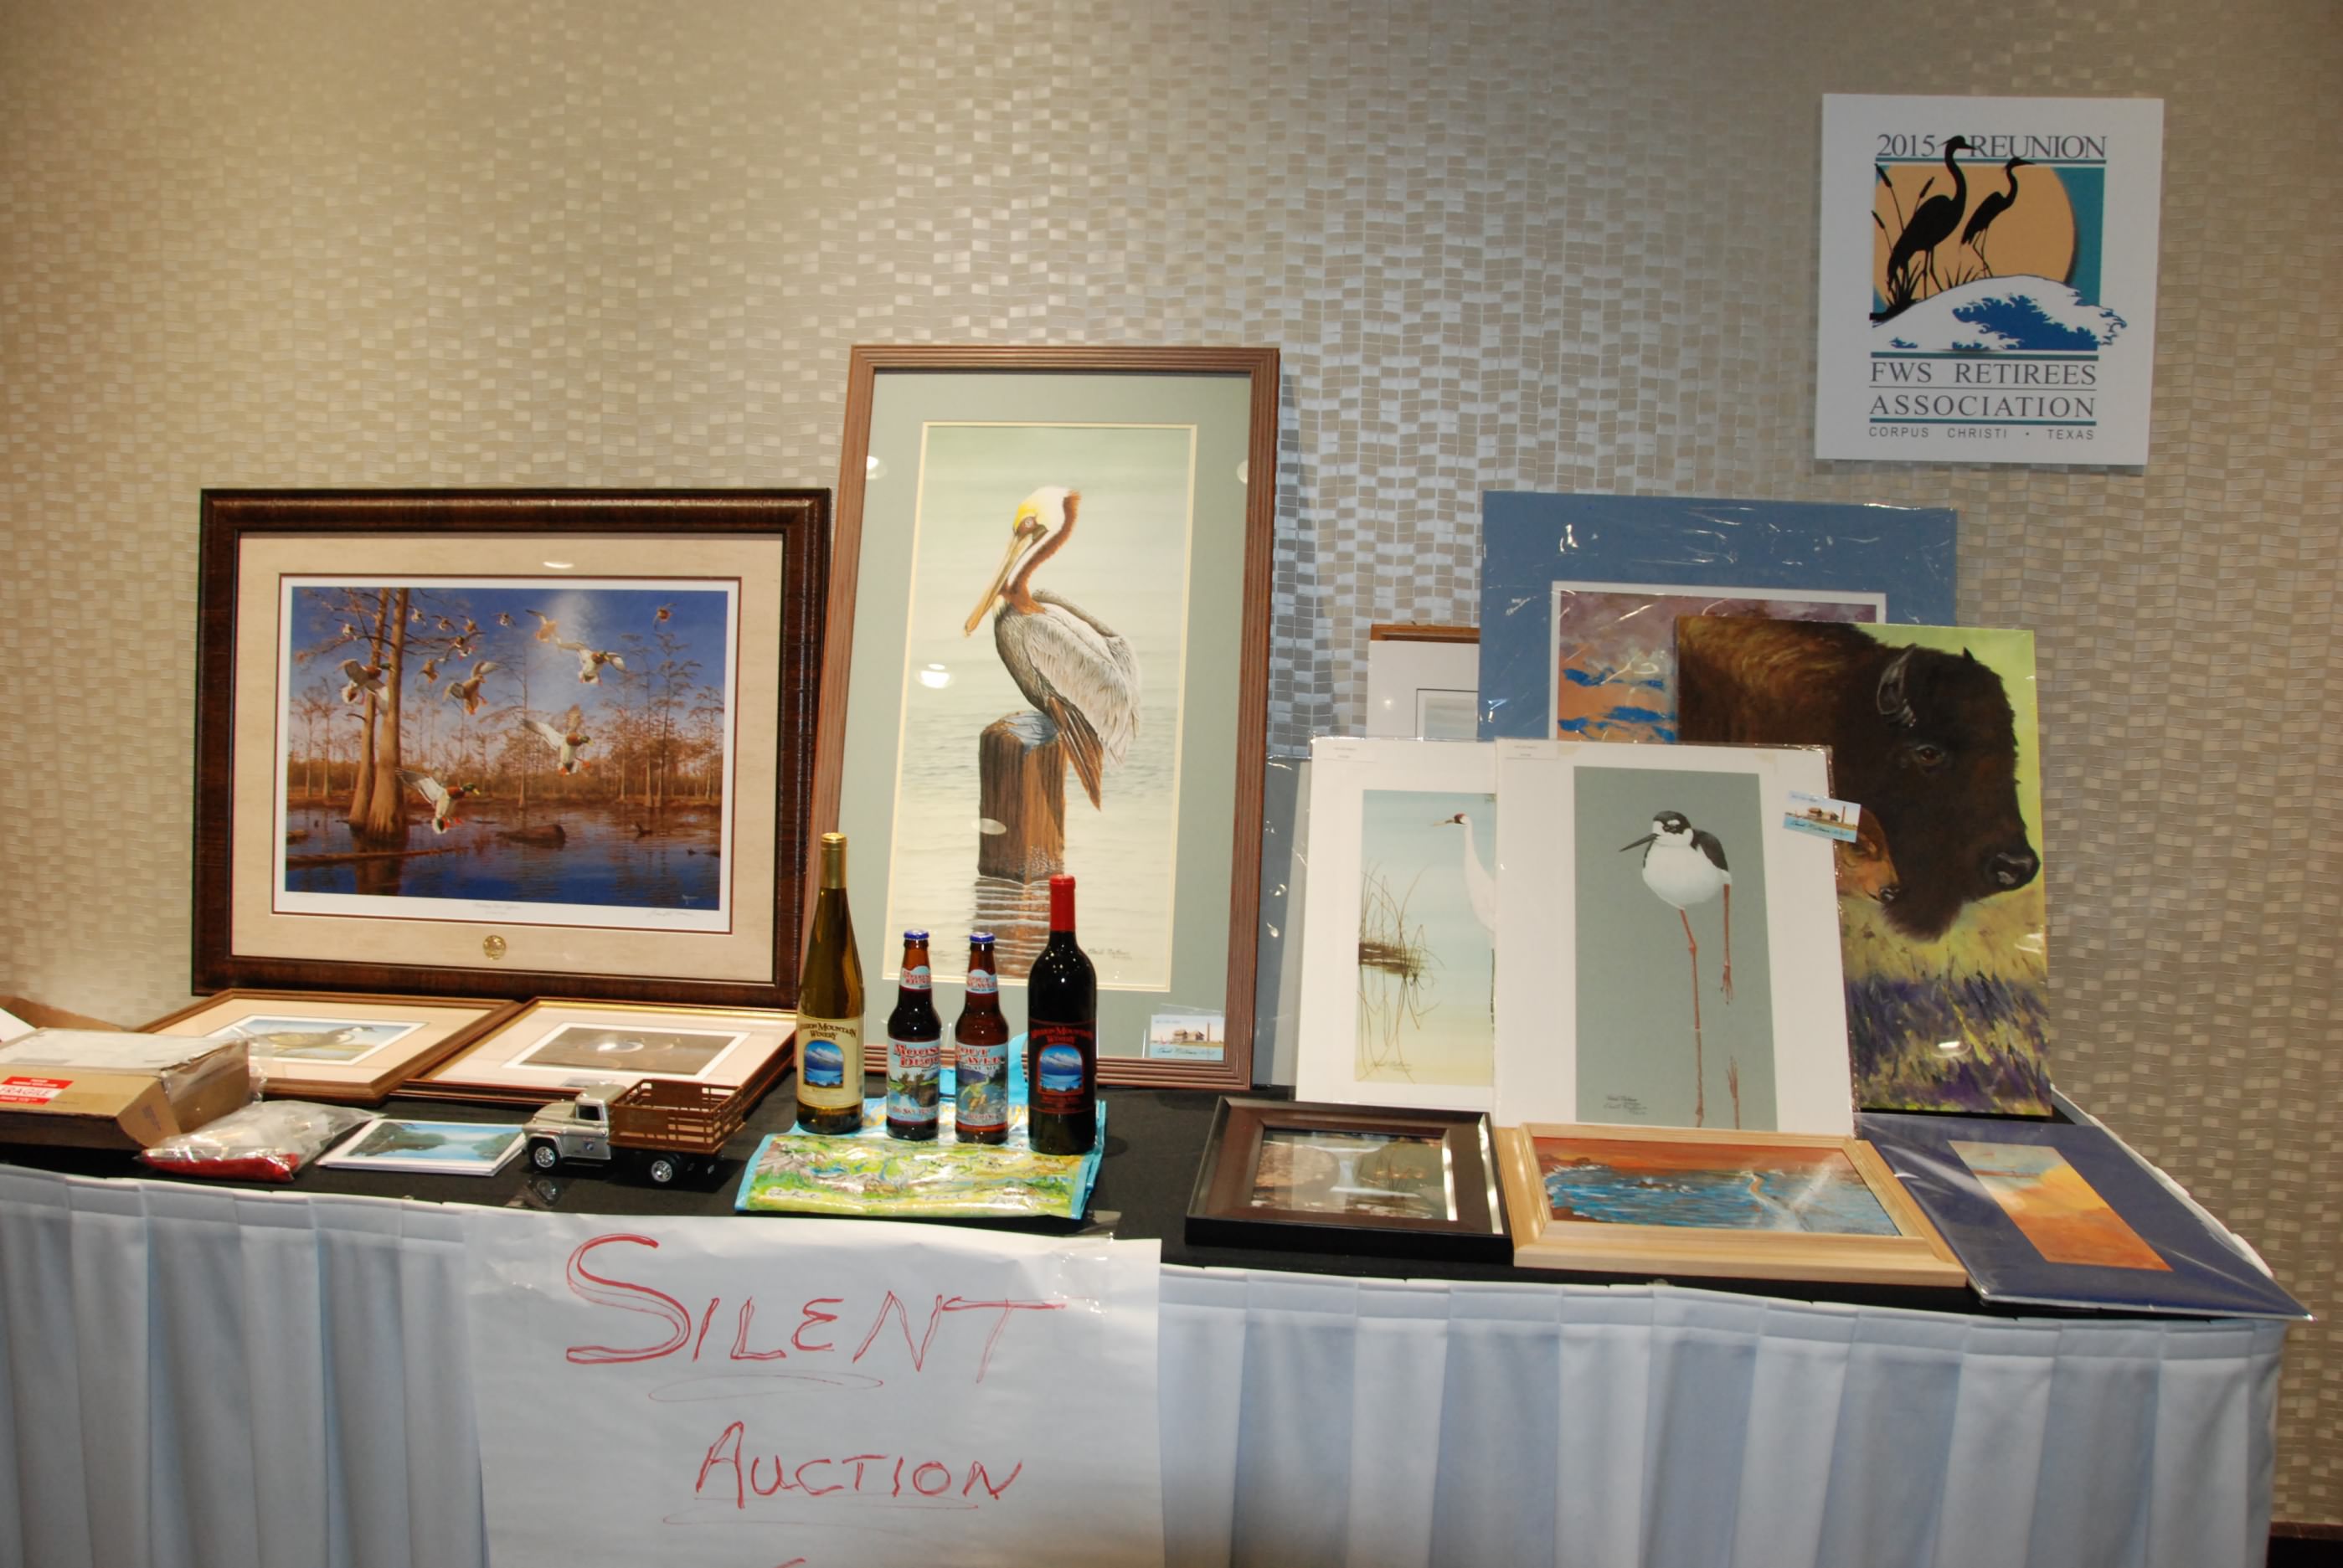 Some of the auction items